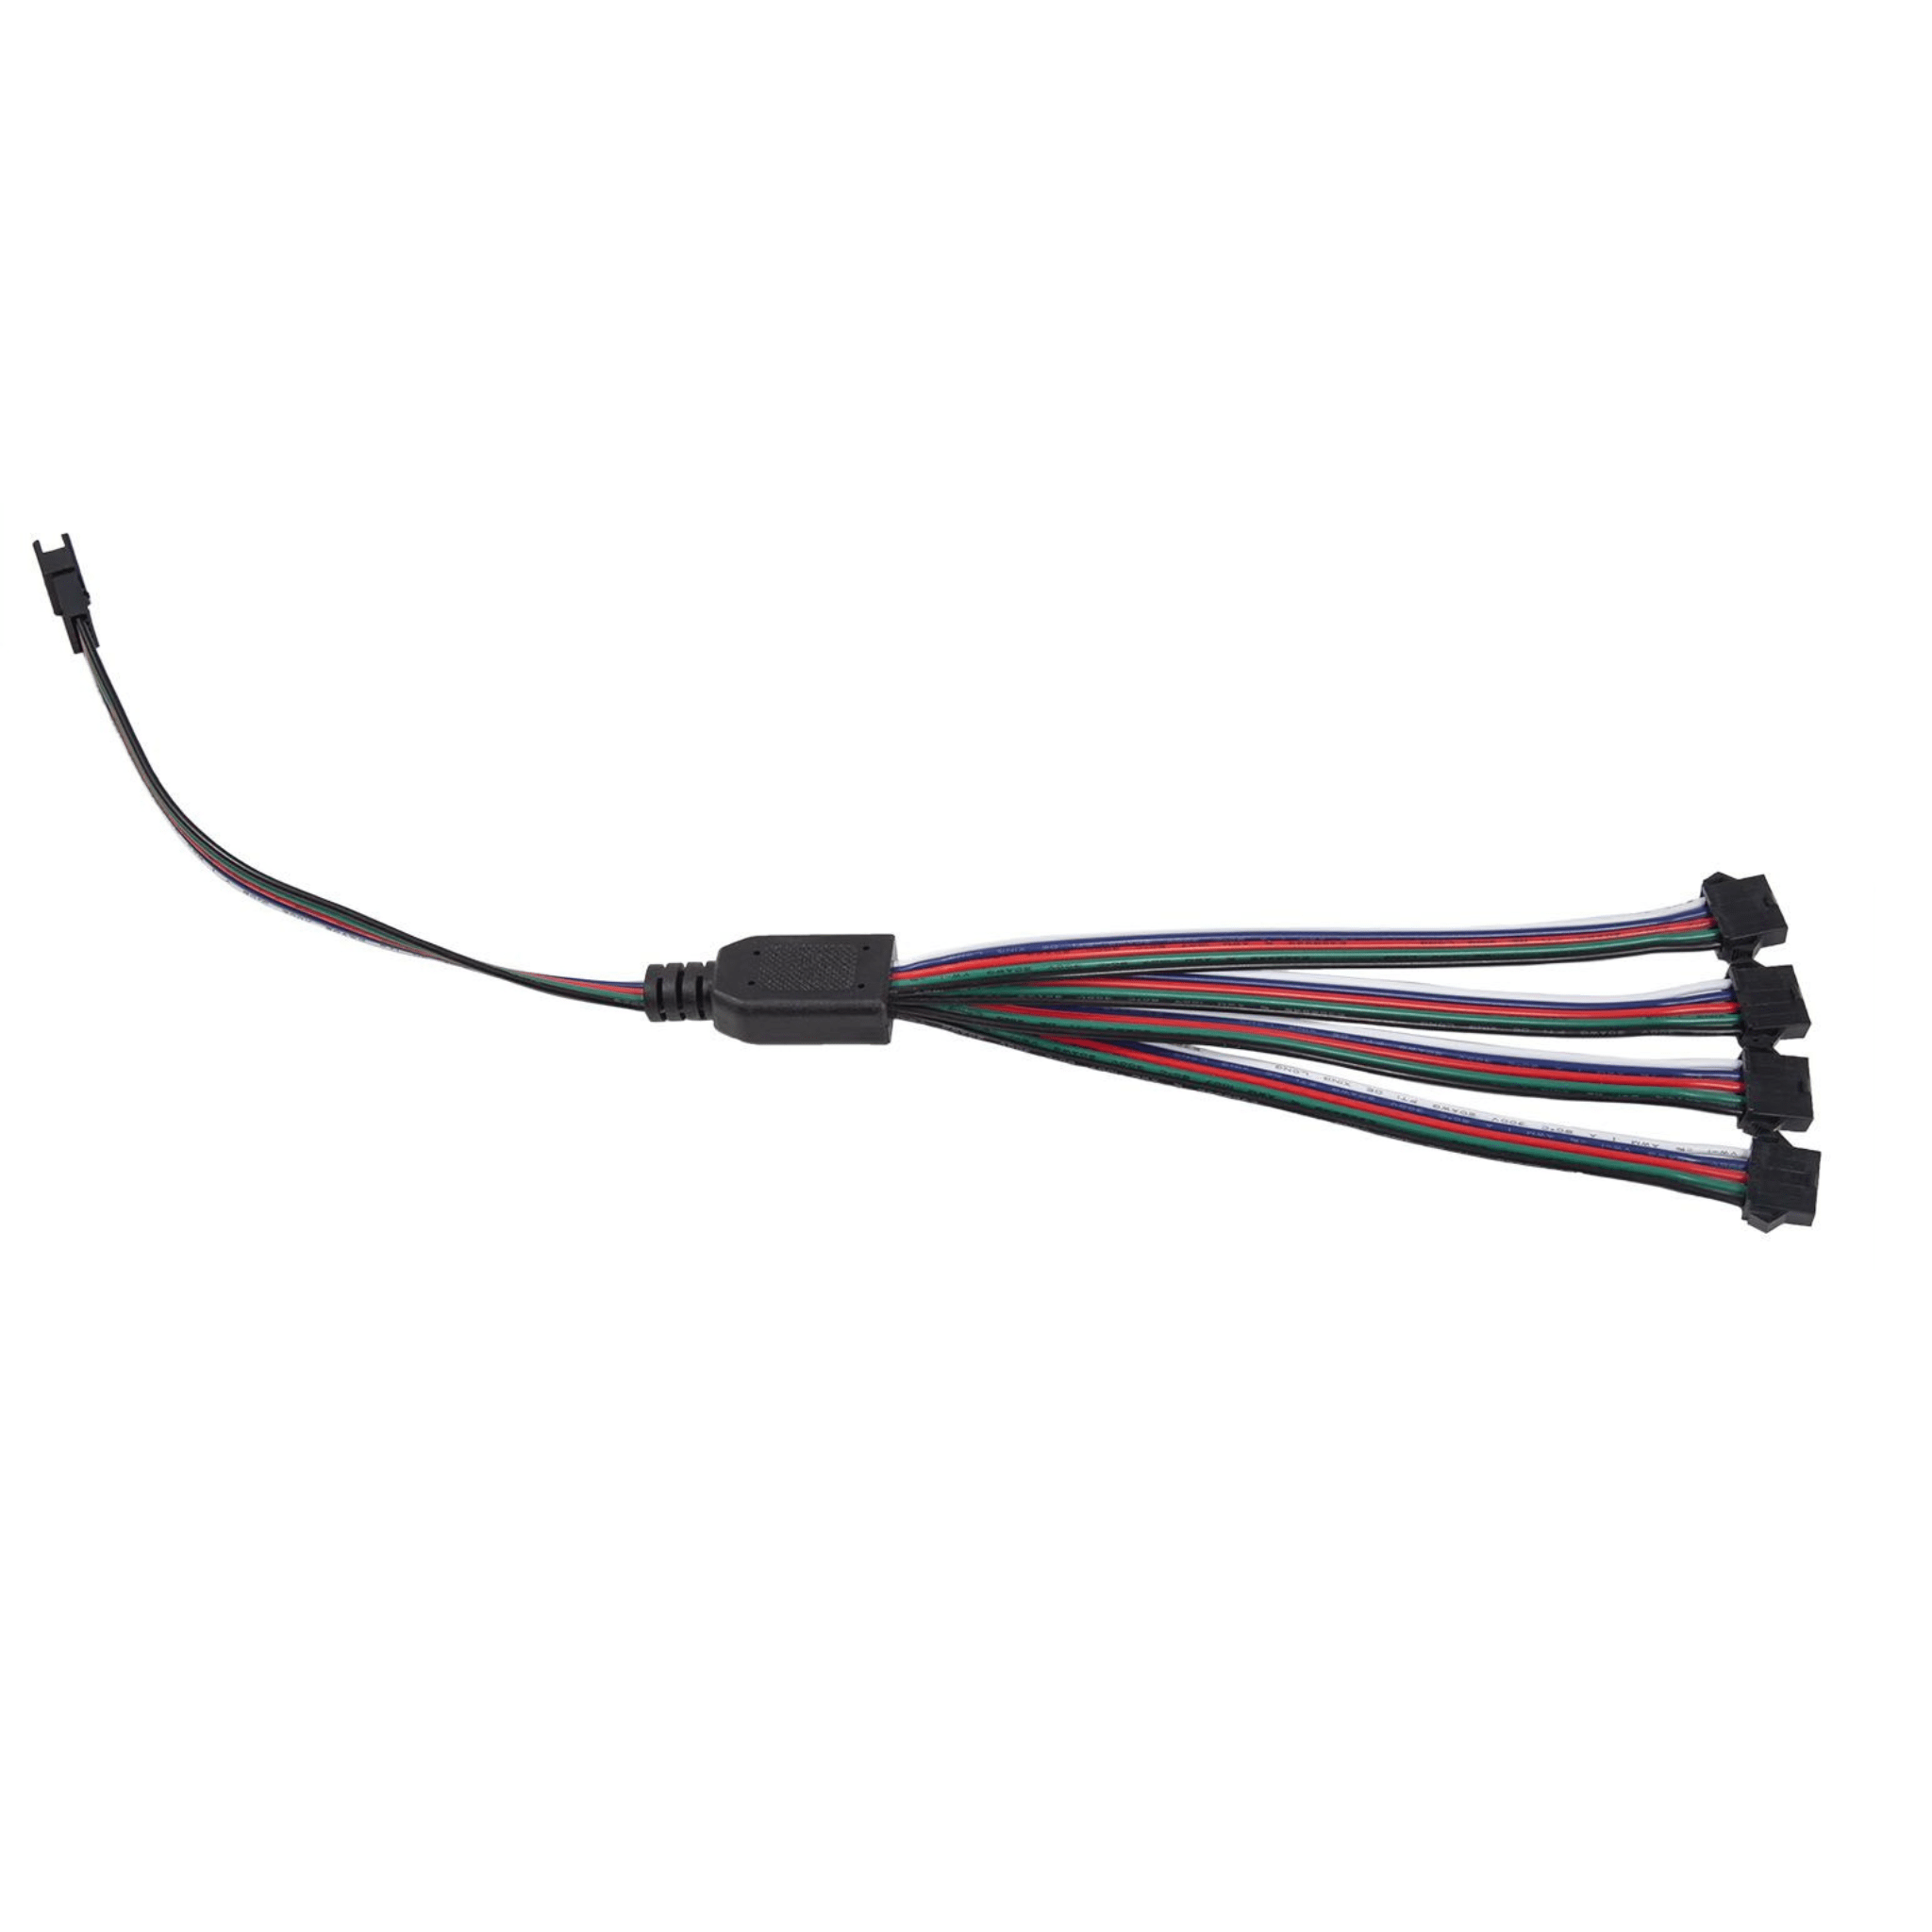 Wire Splitters (increase outputs on controller) - RGB Halo Kits Multicolor Flow Series Color Chasing RGBWA LED headlight kit Oracle Lighting Trendz OneUpLighting Morimoto theretrofitsource AutoLEDTech Diode Dynamics